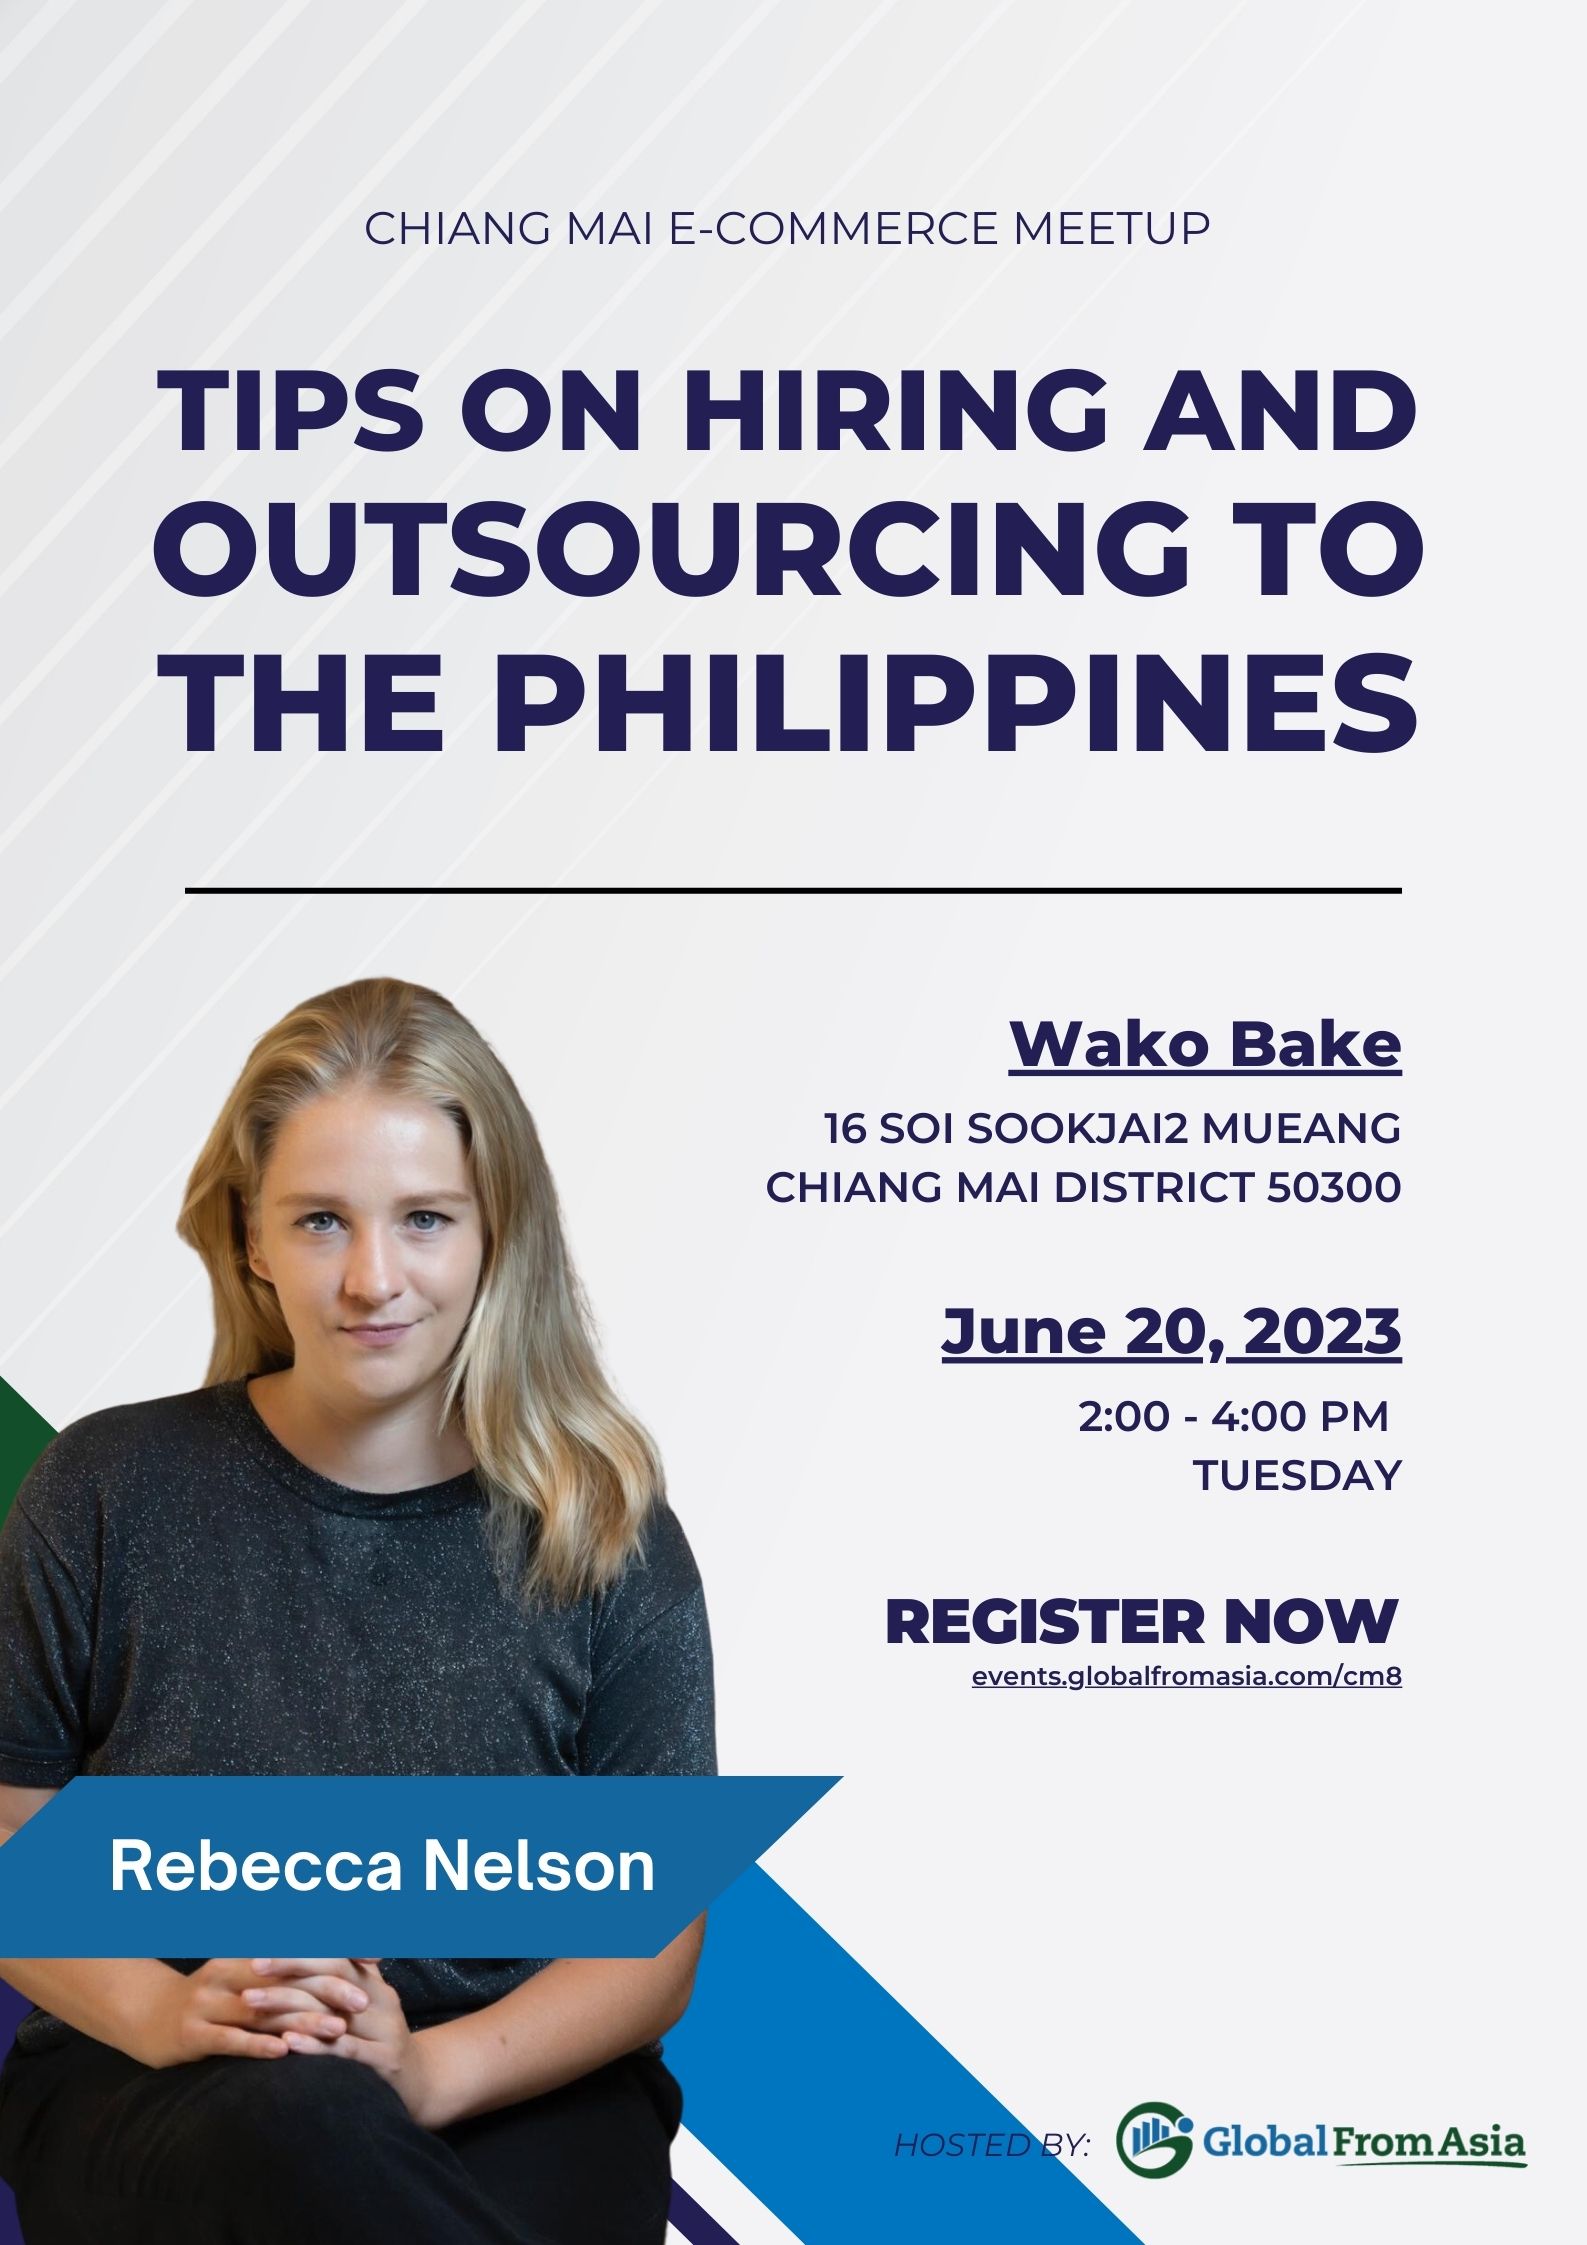 Tips on Hiring and Outsourcing to the Philippines